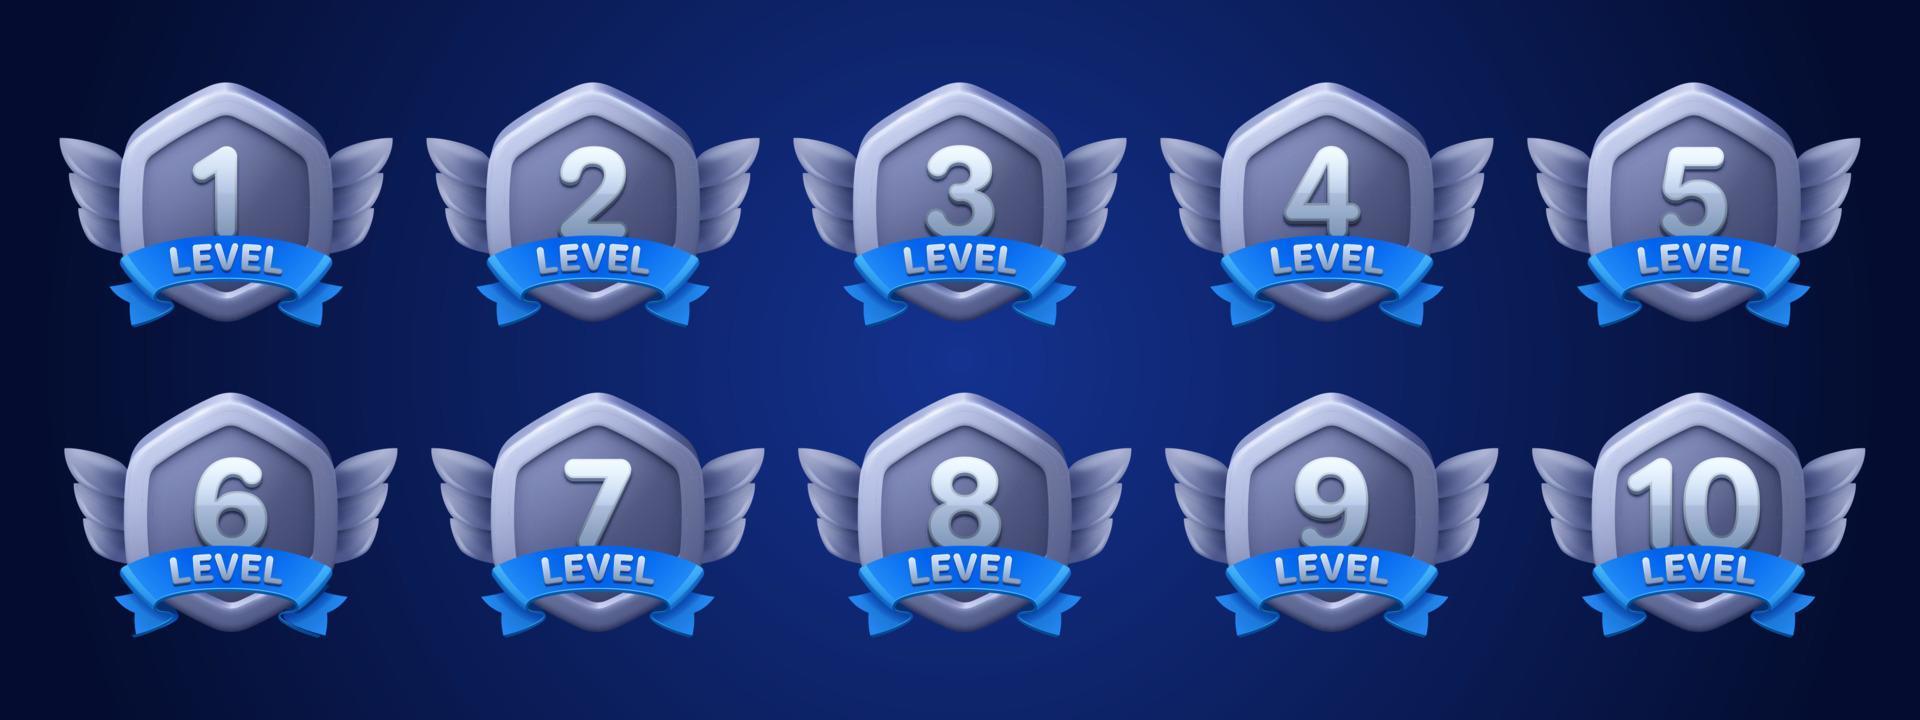 Set of isolated game icon with level up medal. vector